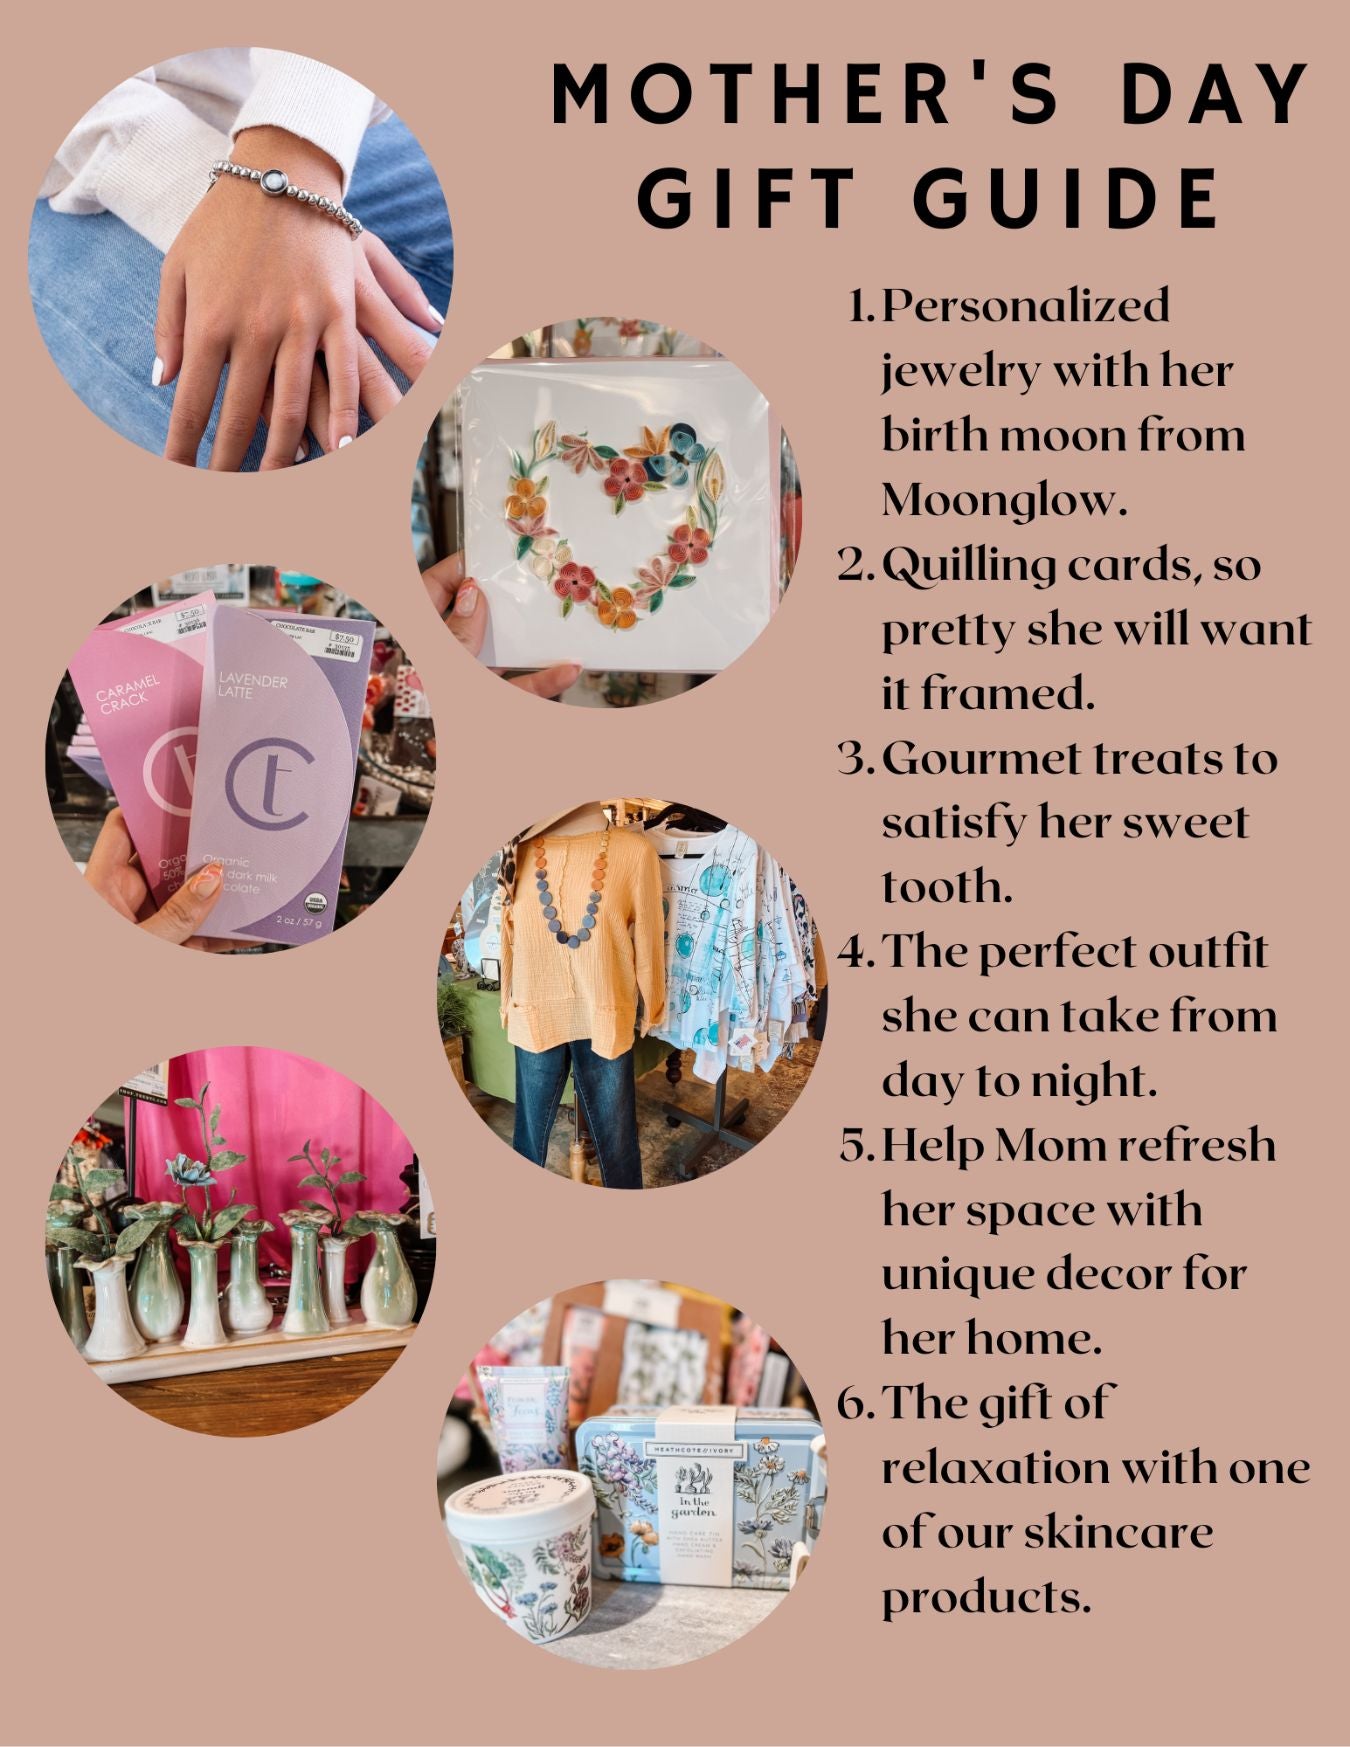 Mother's Day gift guide at Willow Gift & Home - we have you covered